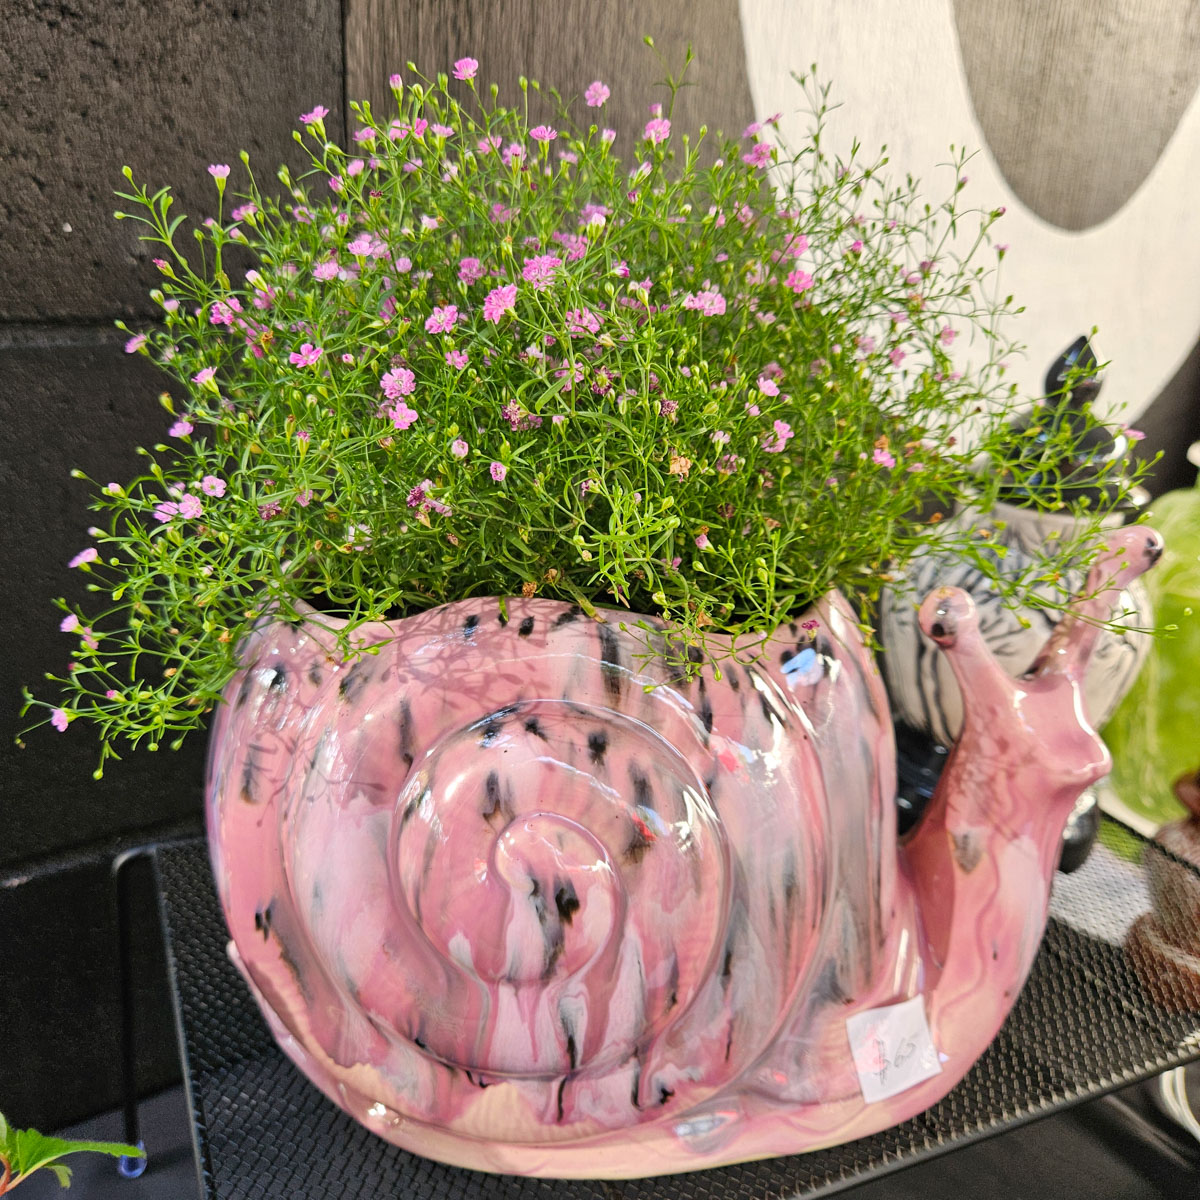 Ceramic snail pot, planted with flowers - Pauline Grabham - A Shade of Allusion